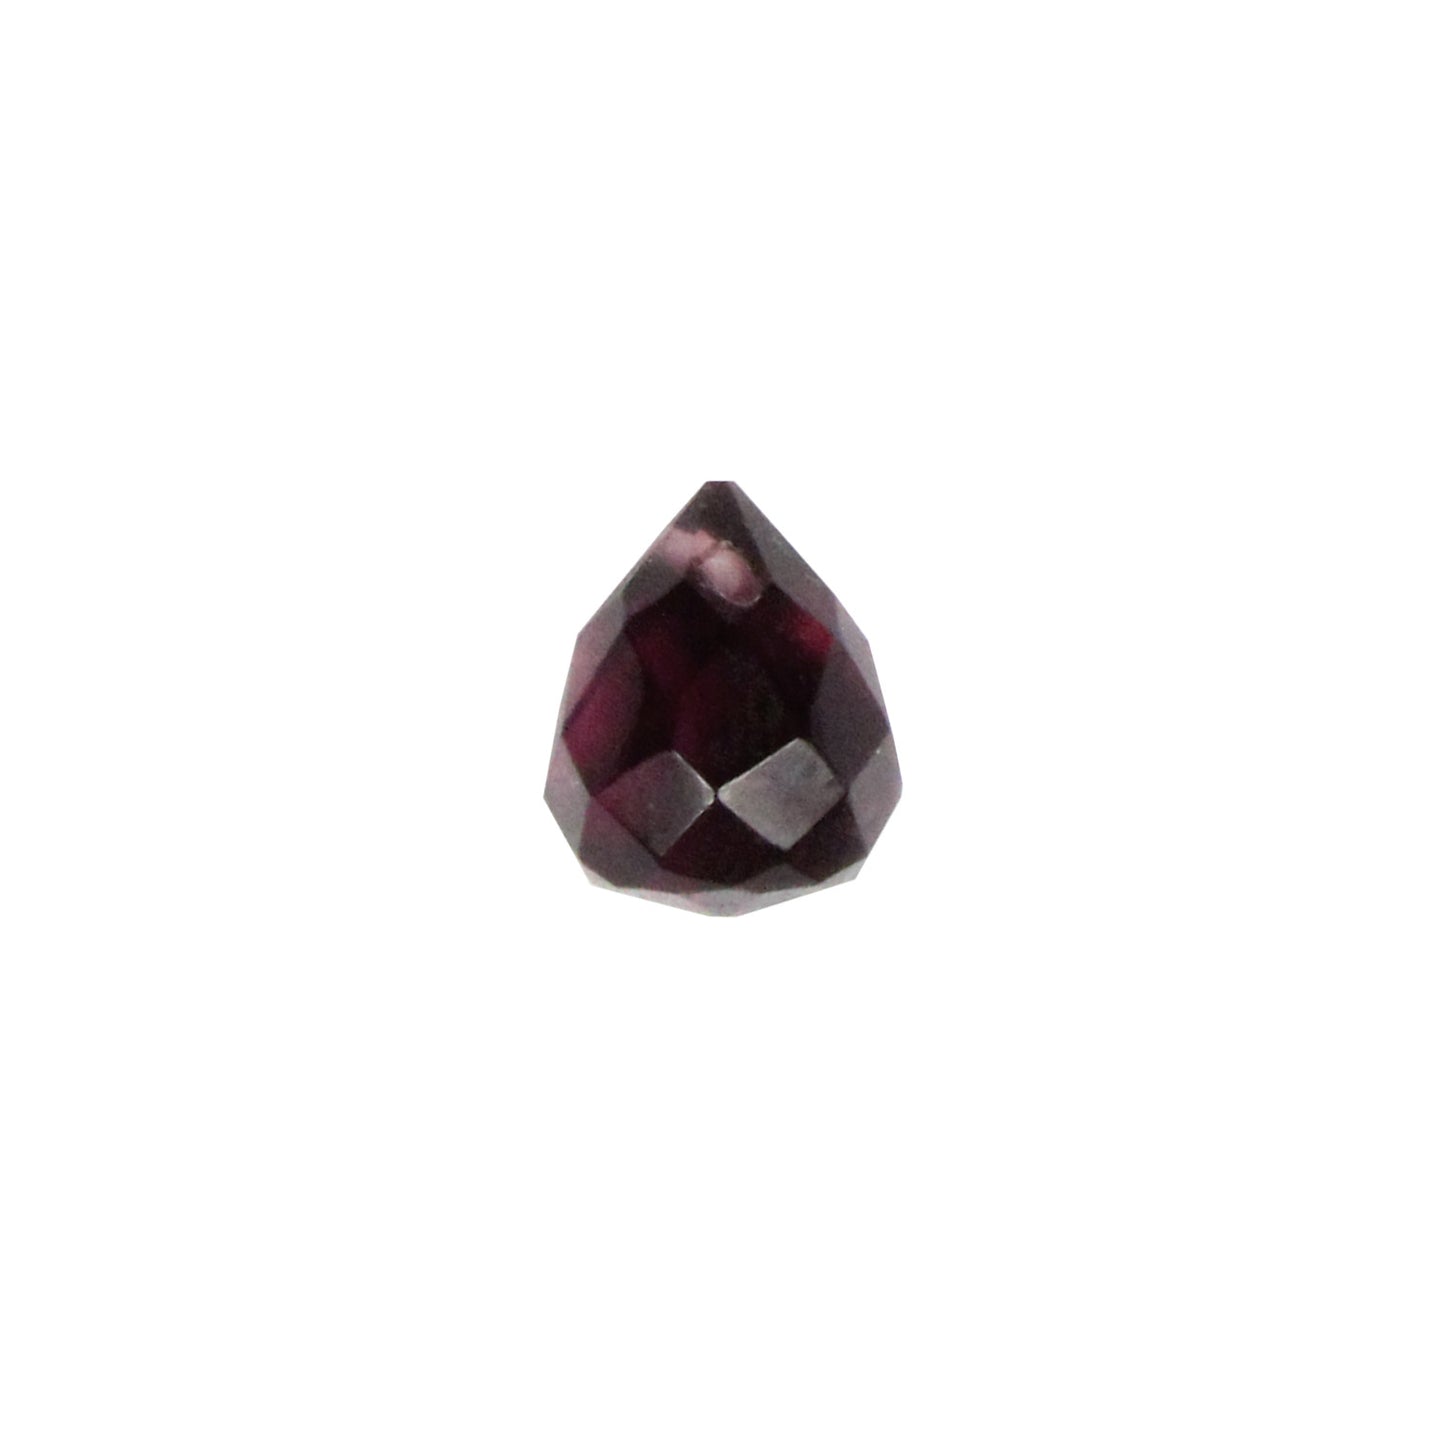 Amethyst Faceted Teardrop / 12 x 10mm / man-made translucent stone bead